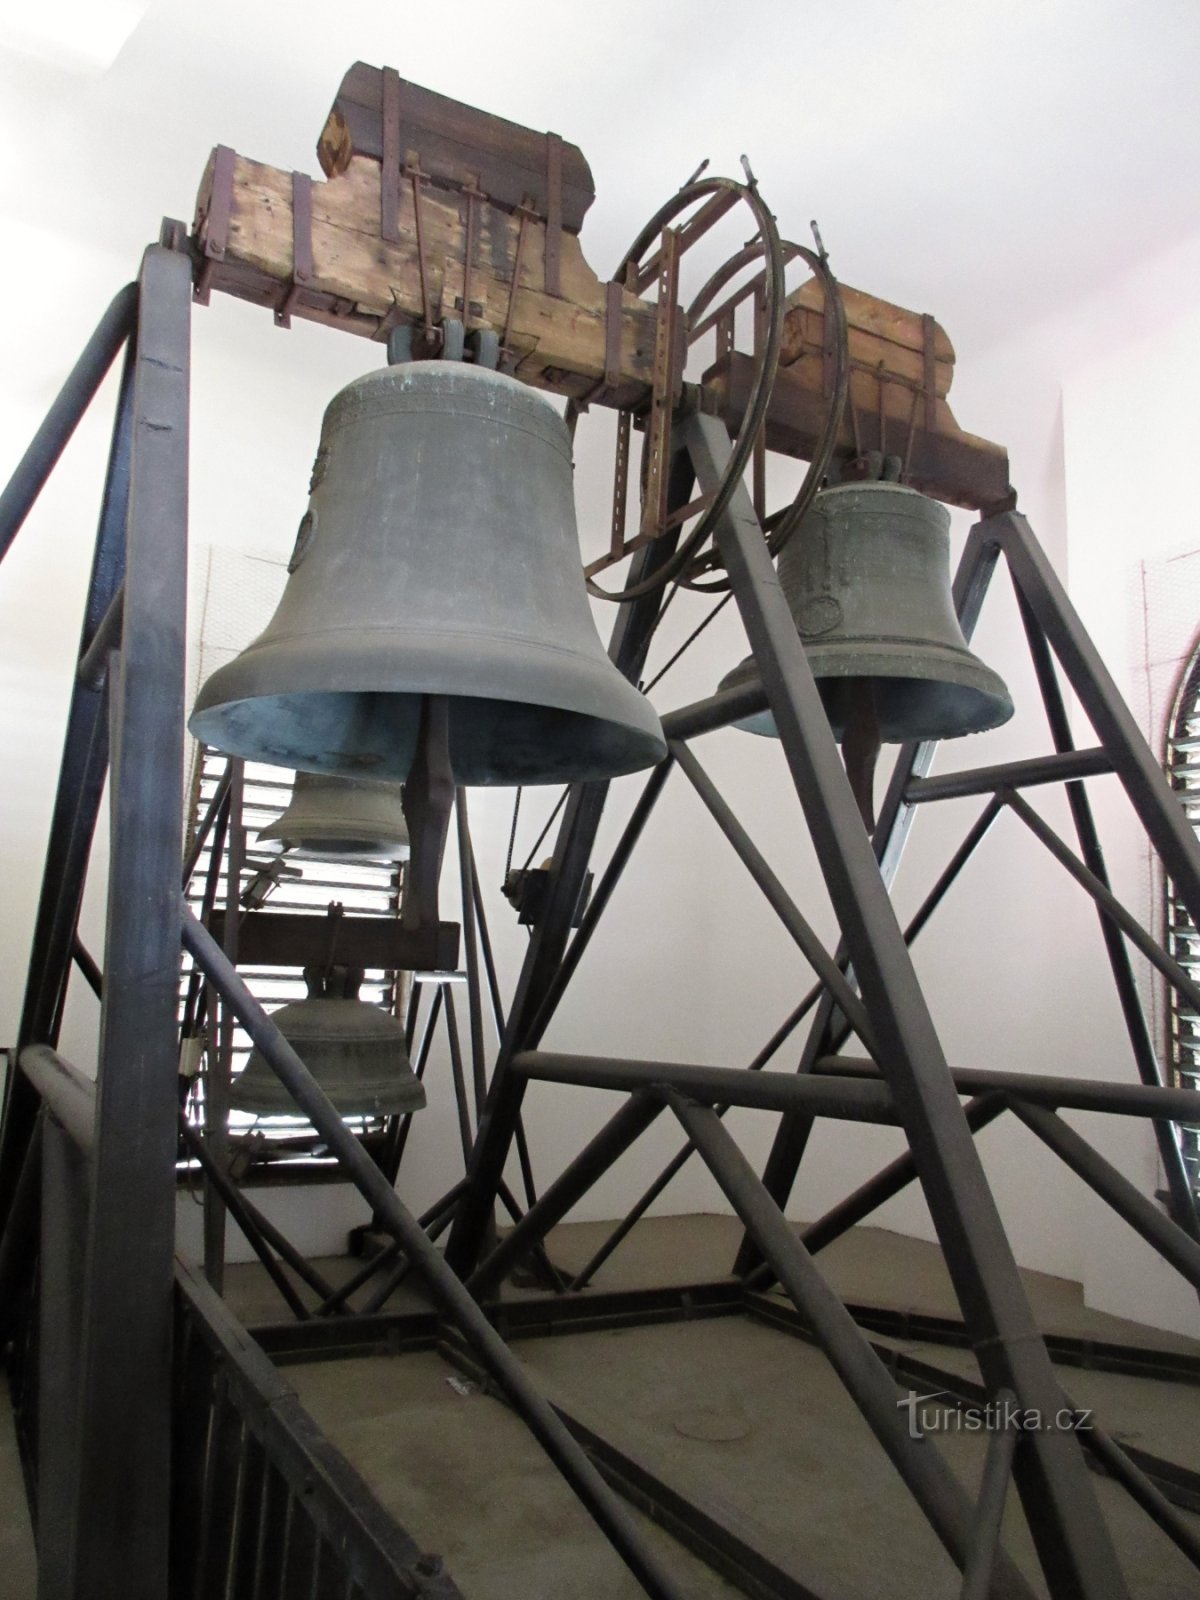 Bells in the church tower